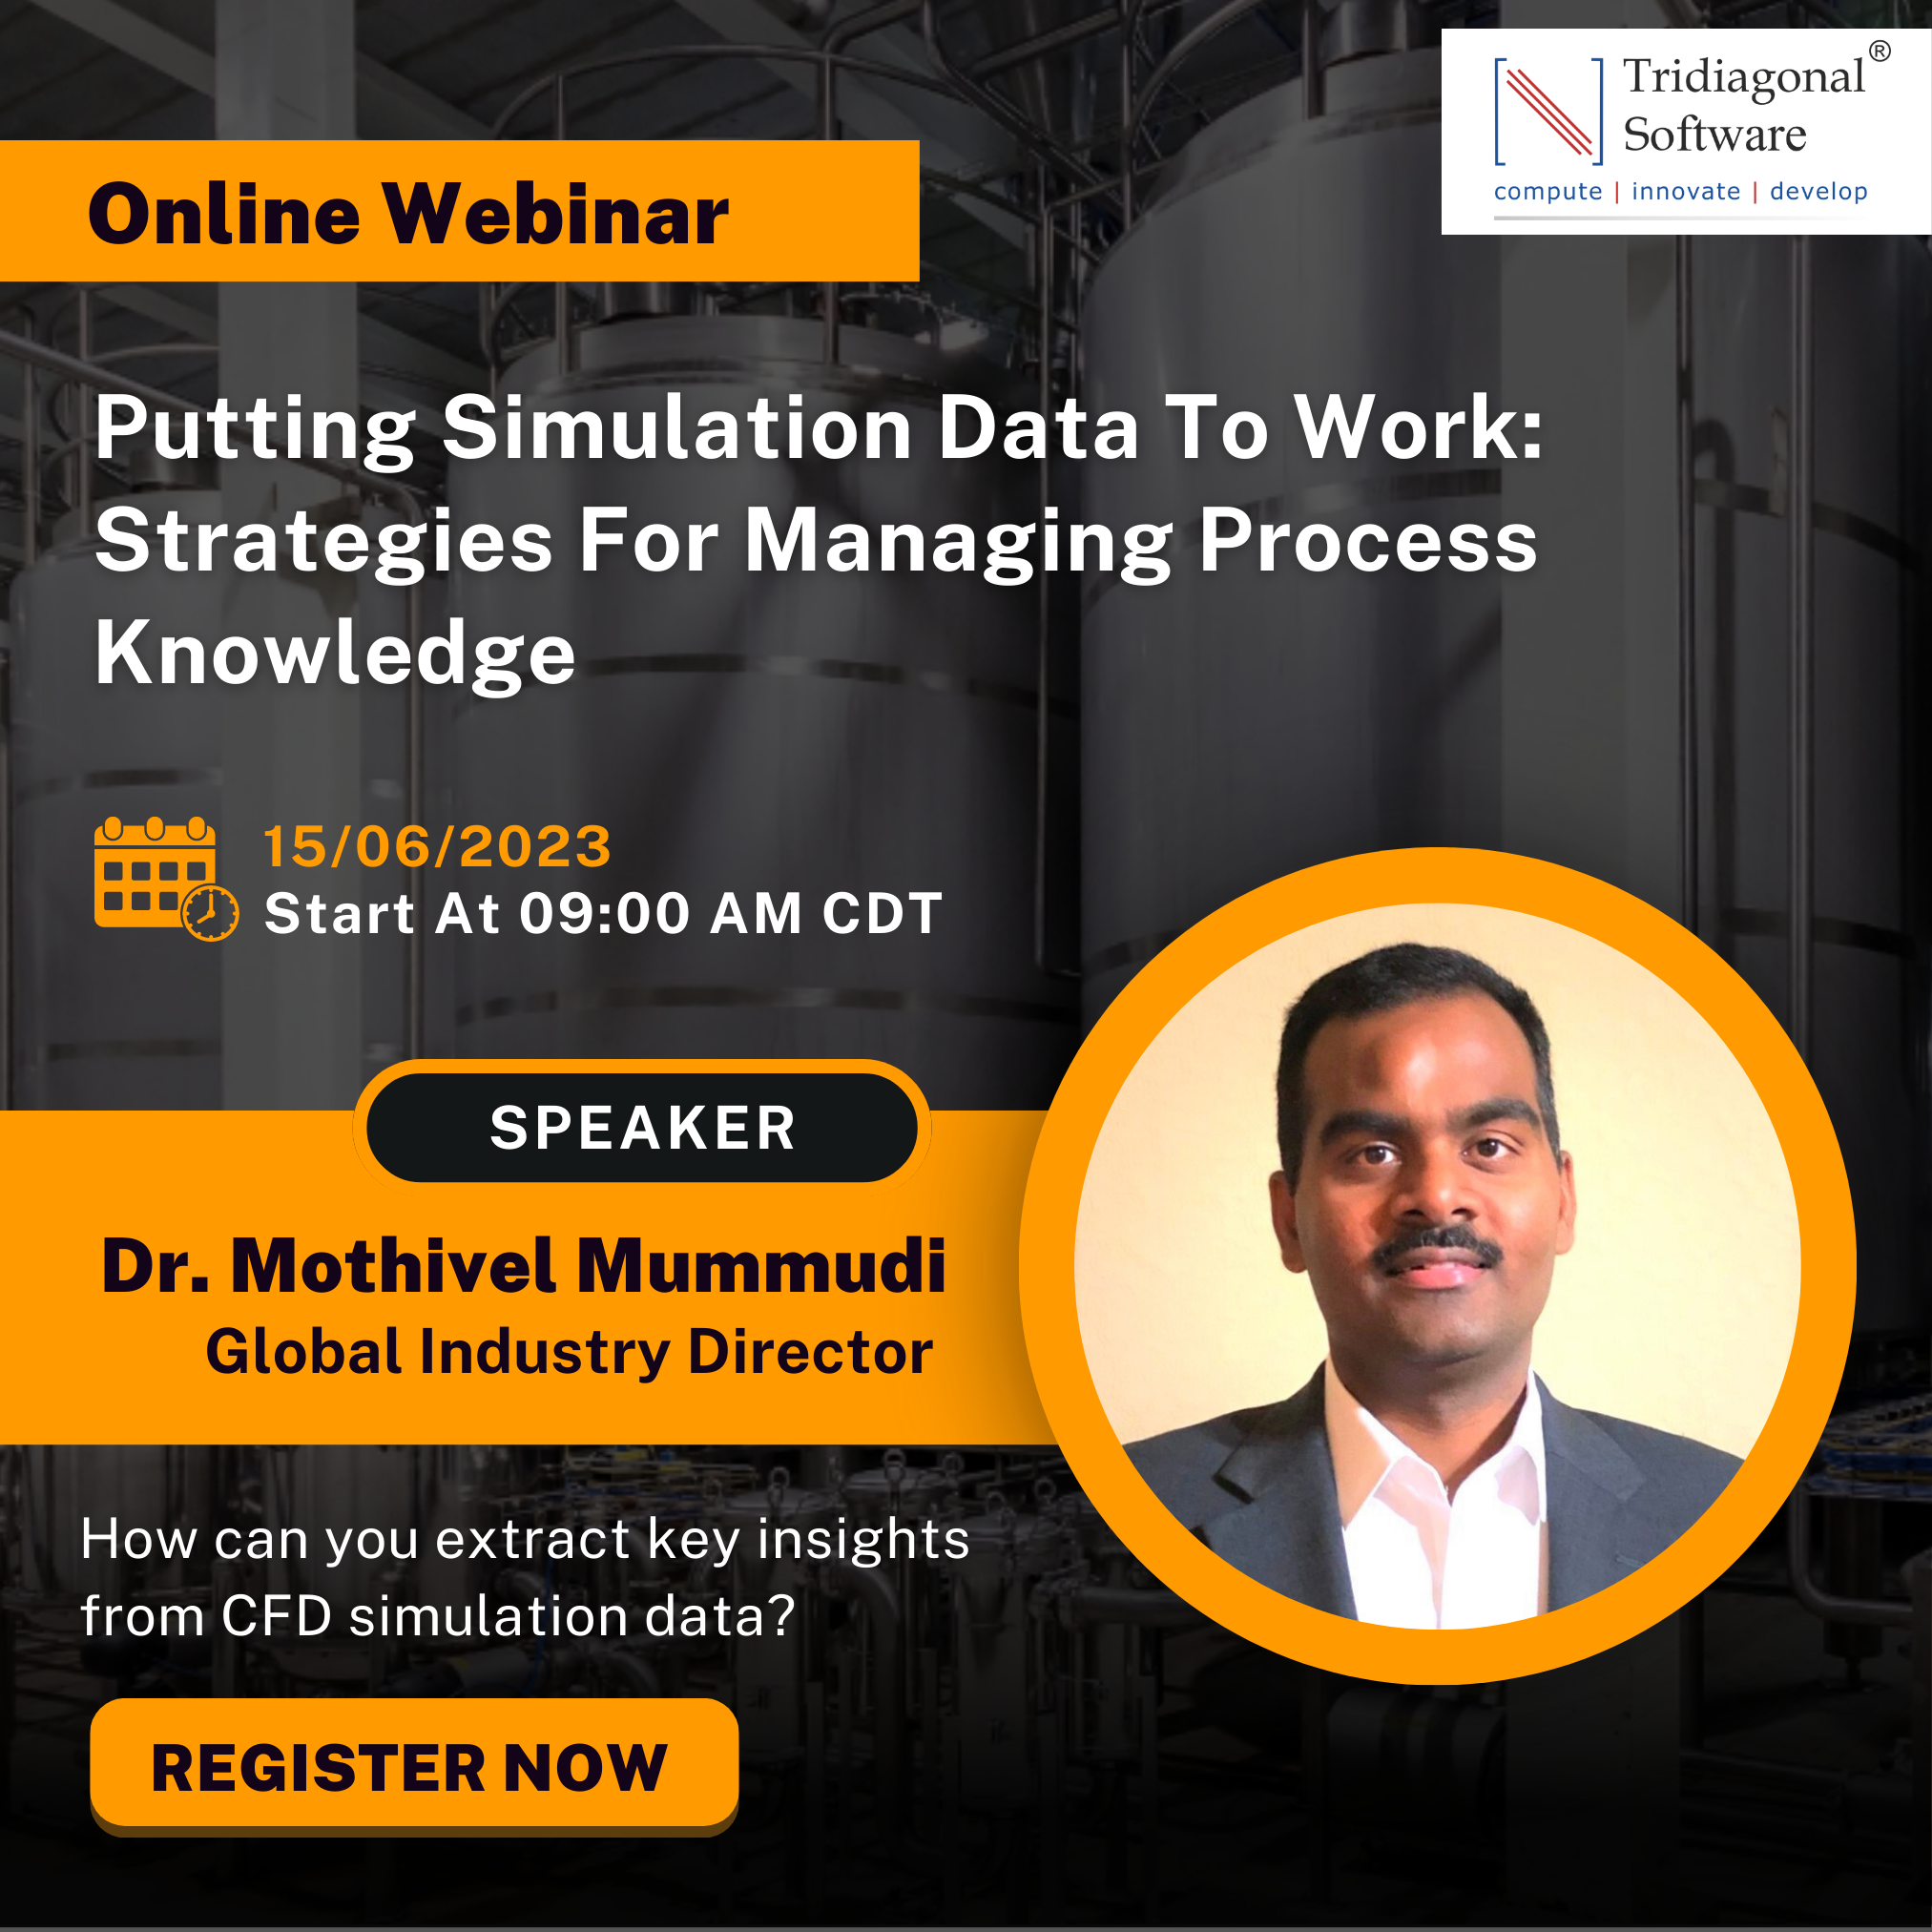 Putting Simulation Data To Work: Strategies For Managing Process Knowledge